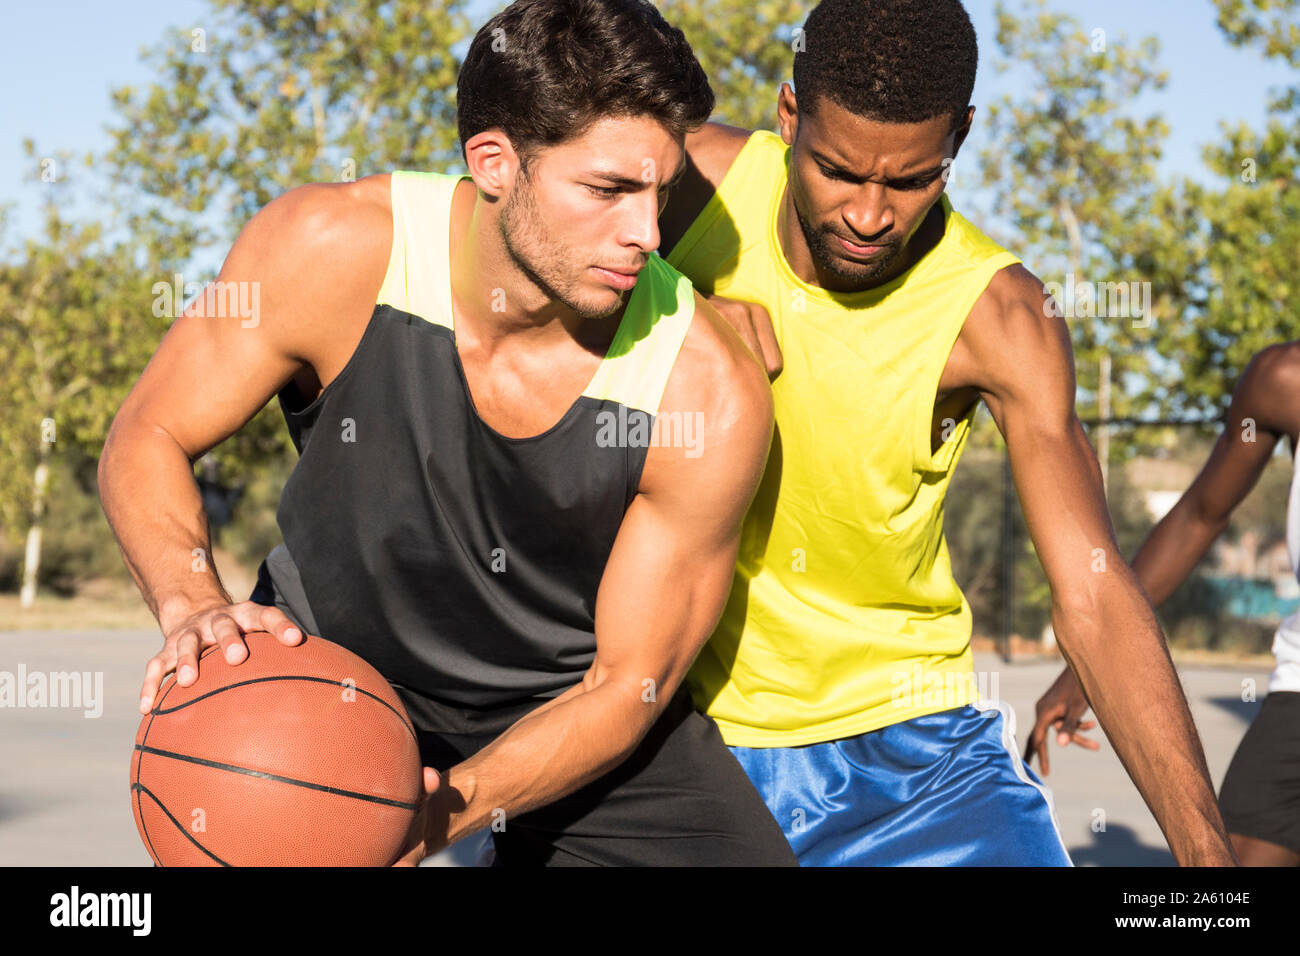 Young men playing basketball and dribbling ball on sports ground Stock Photo